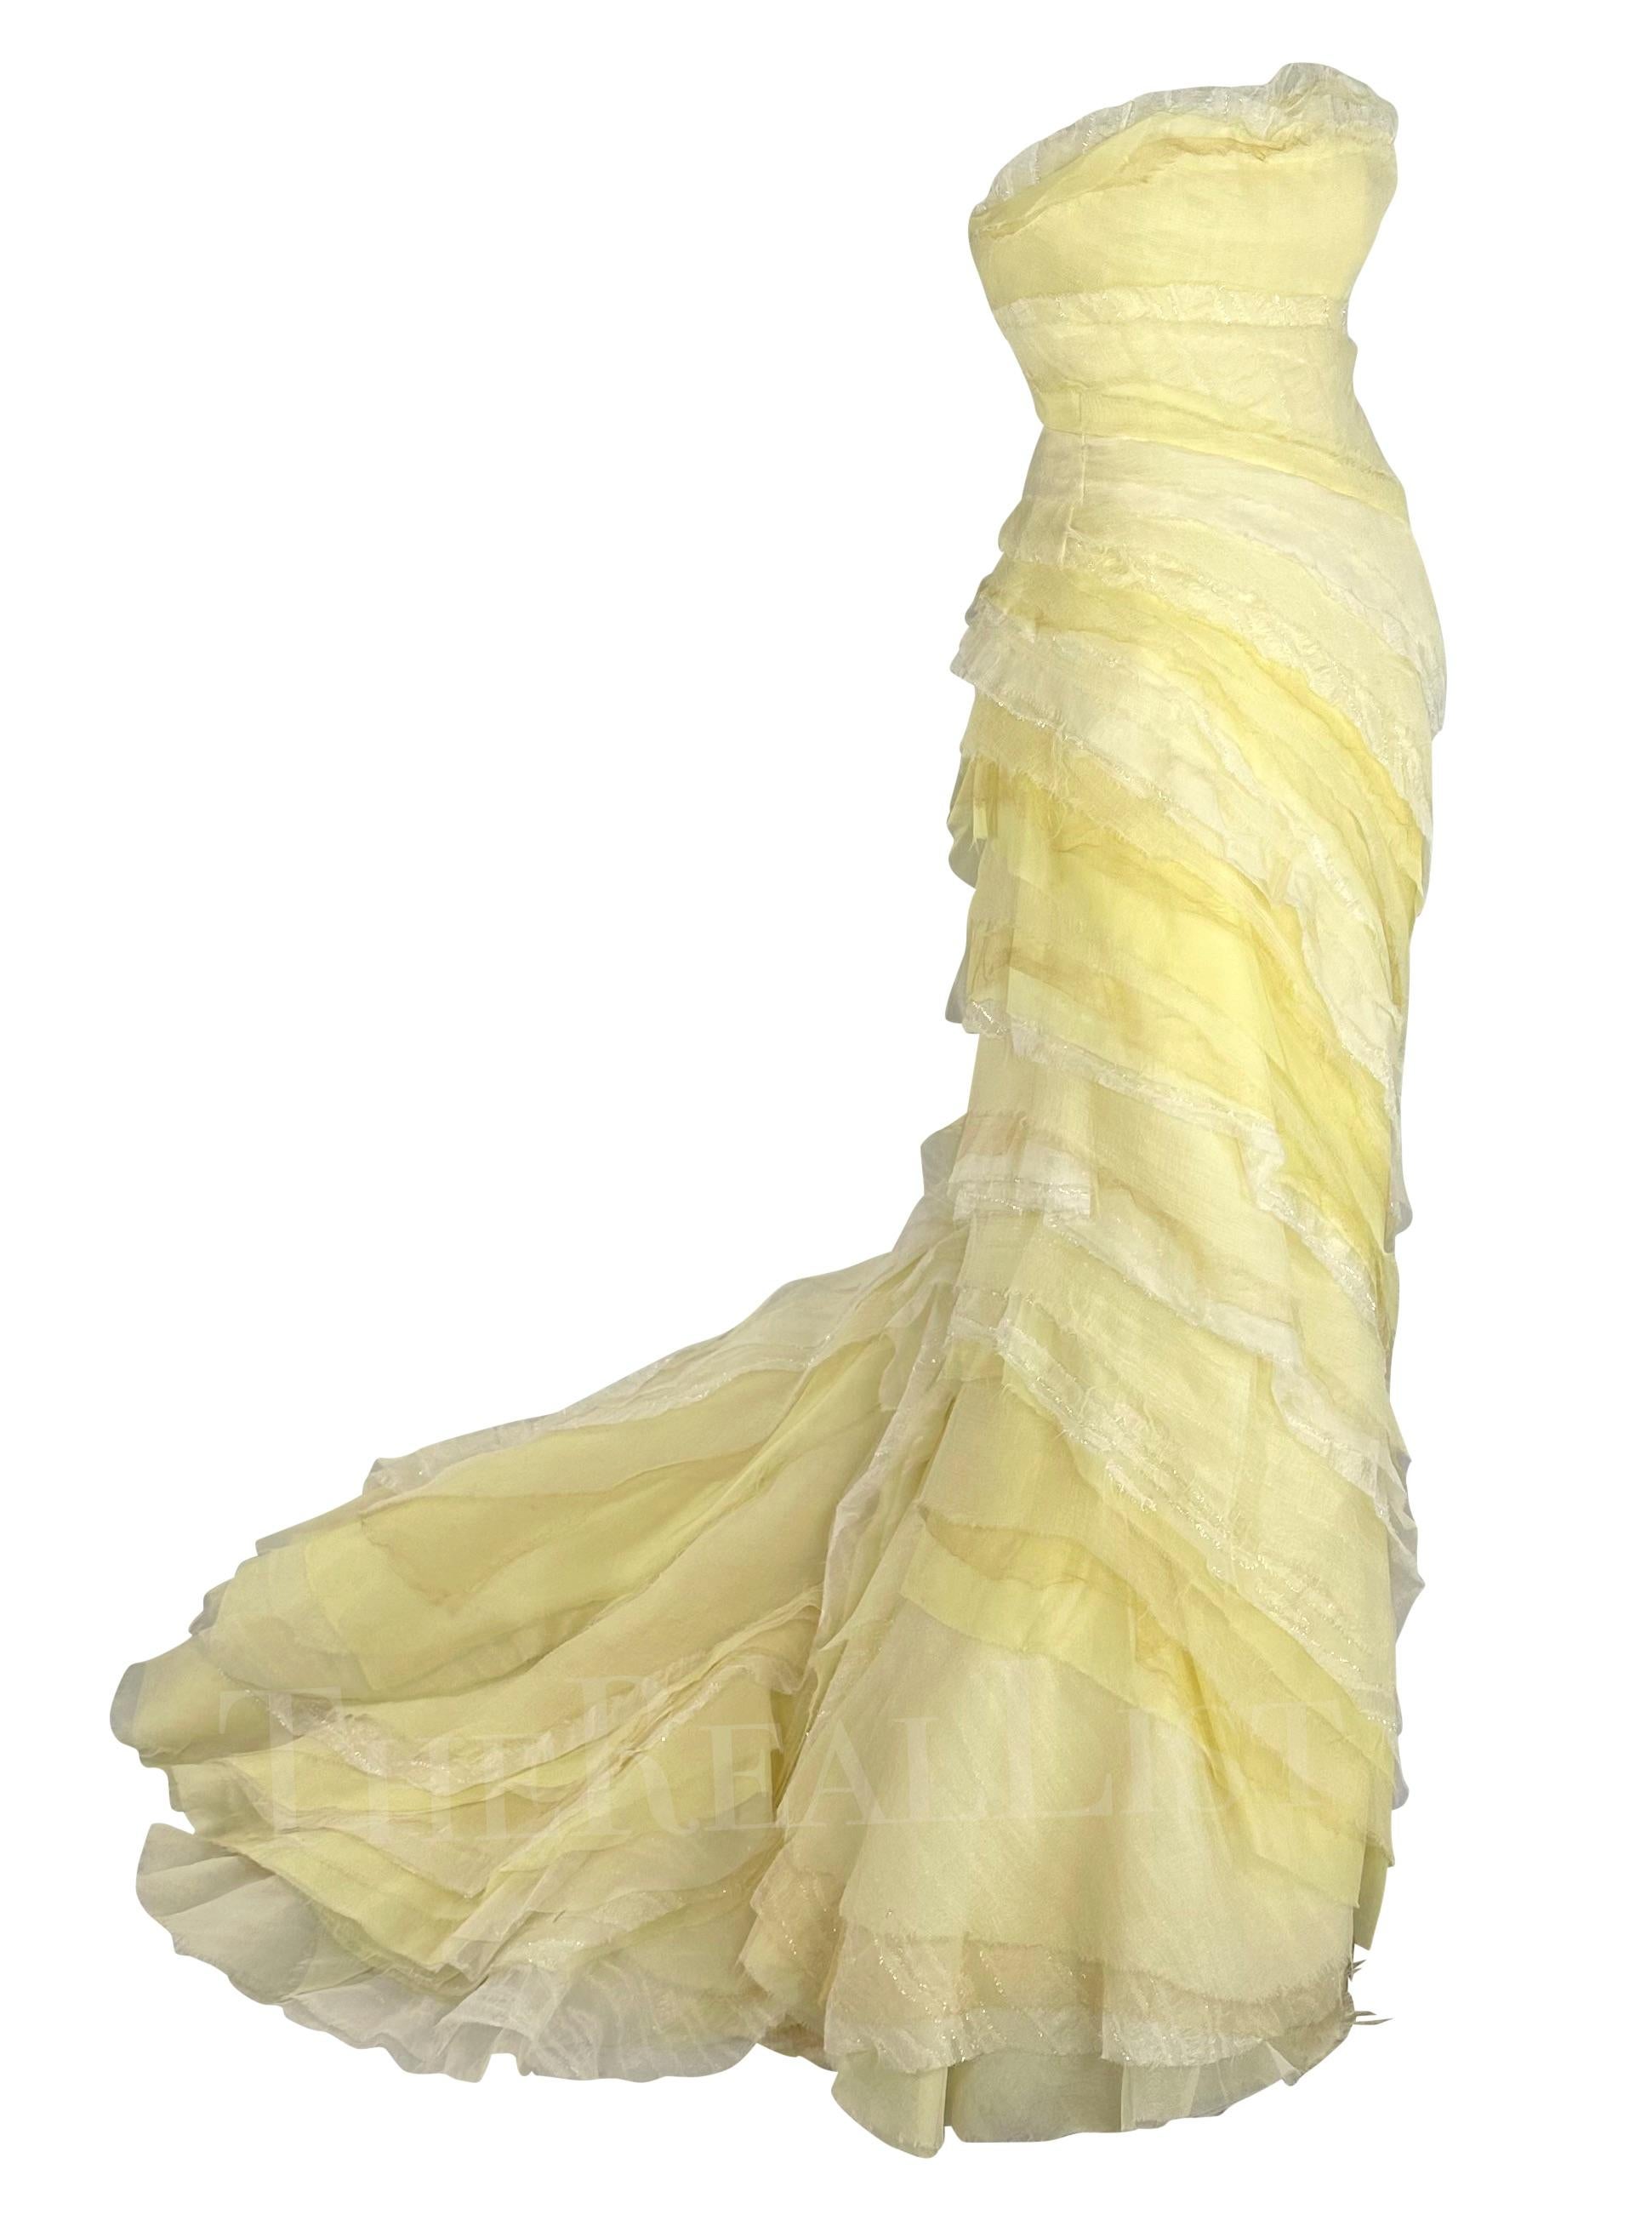 2010 Roberto Cavalli Custom Red Carpet Pastel Canary Yellow Tulle Gown Train In Good Condition For Sale In West Hollywood, CA